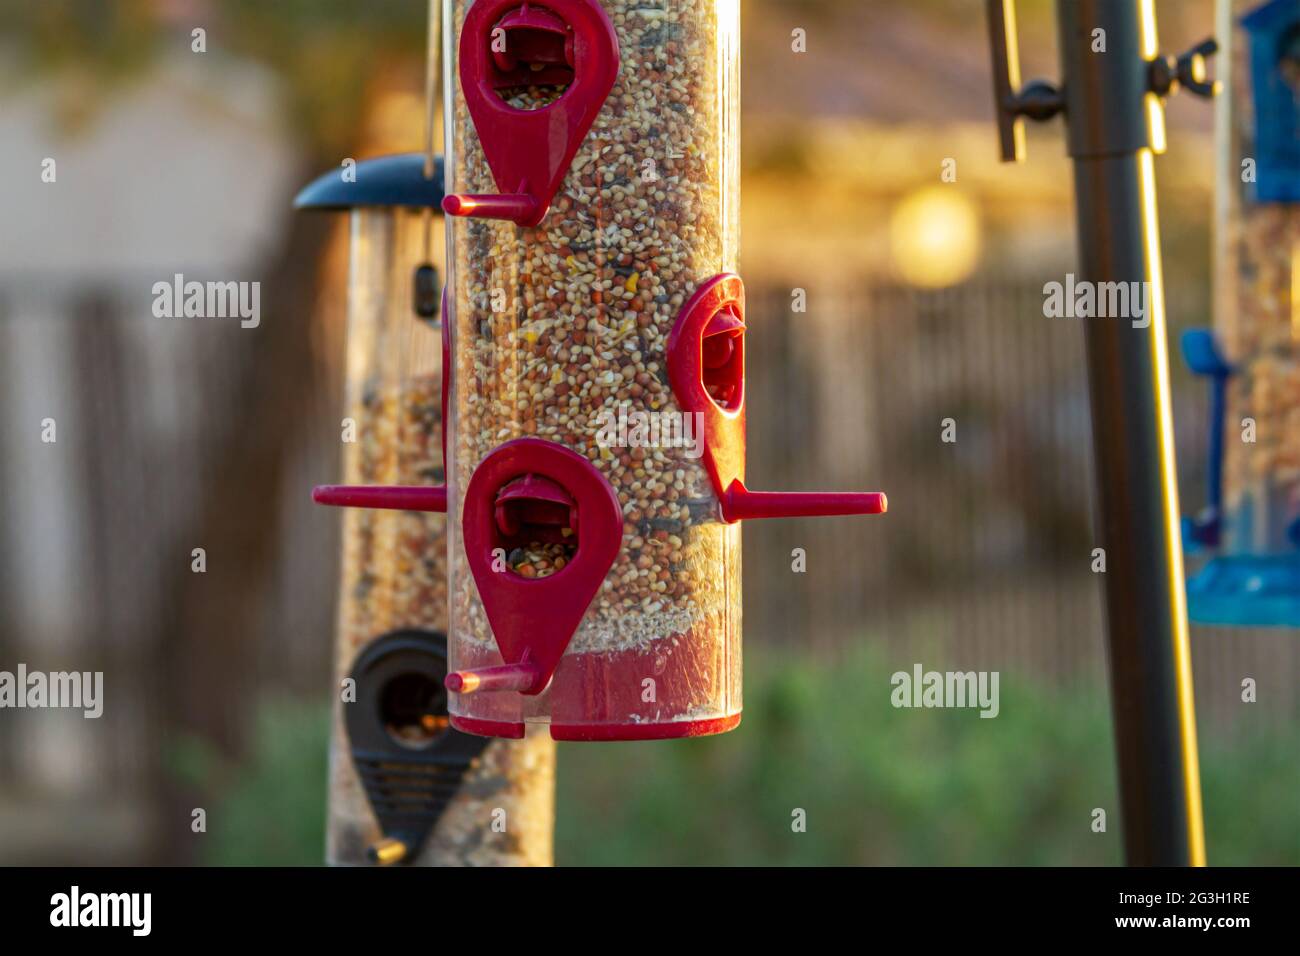 Close up view of a red bird feeder in a backyard Stock Photo